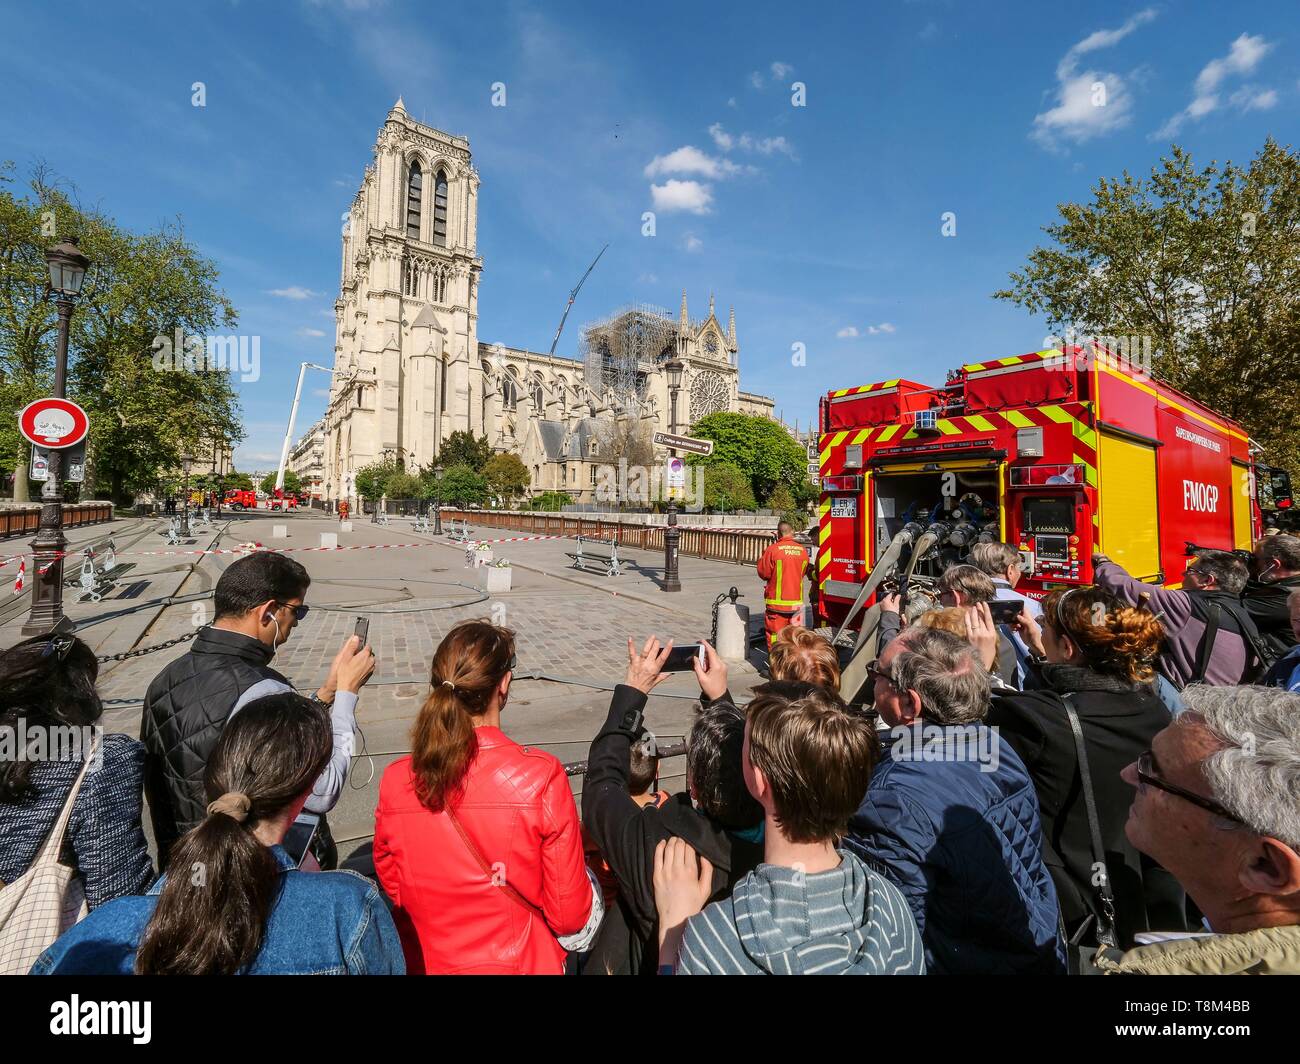 France, Paris (75), World Heritage Site of UNESCO, Notre Dame Cathedral, April 17, 2019, 2 days after the terrible fire that ravaged the whole frame, a dense crowd came to notice the damage caused by the fire of 15 April 2019 Stock Photo